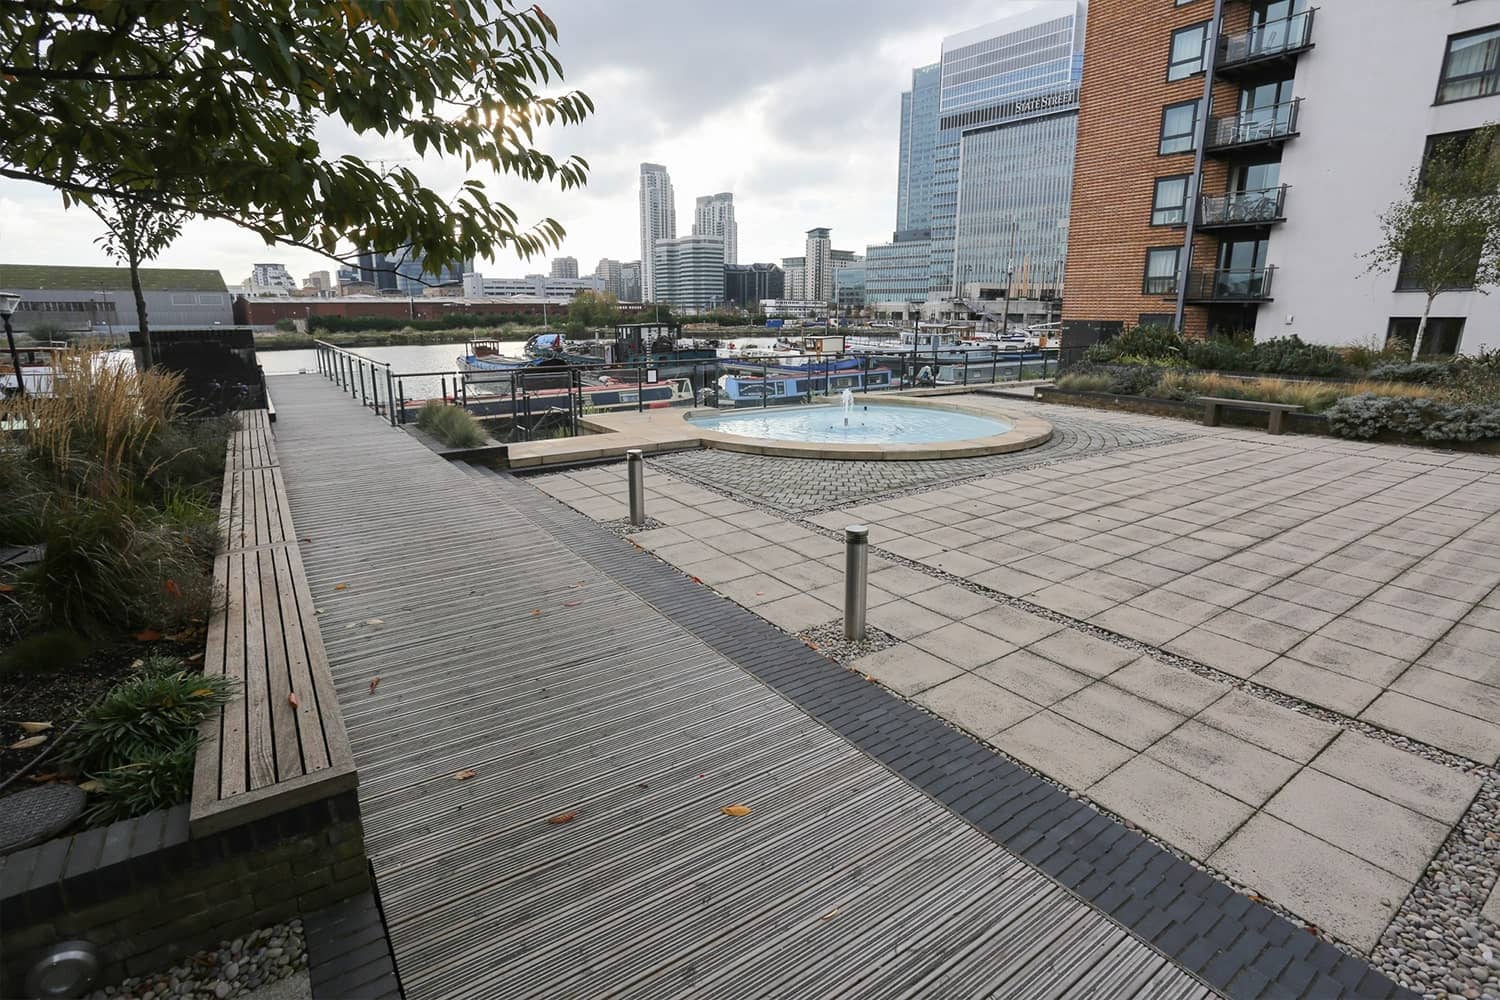 Gripsure anti-slip decking used for public outdoor space in Canary Wharf